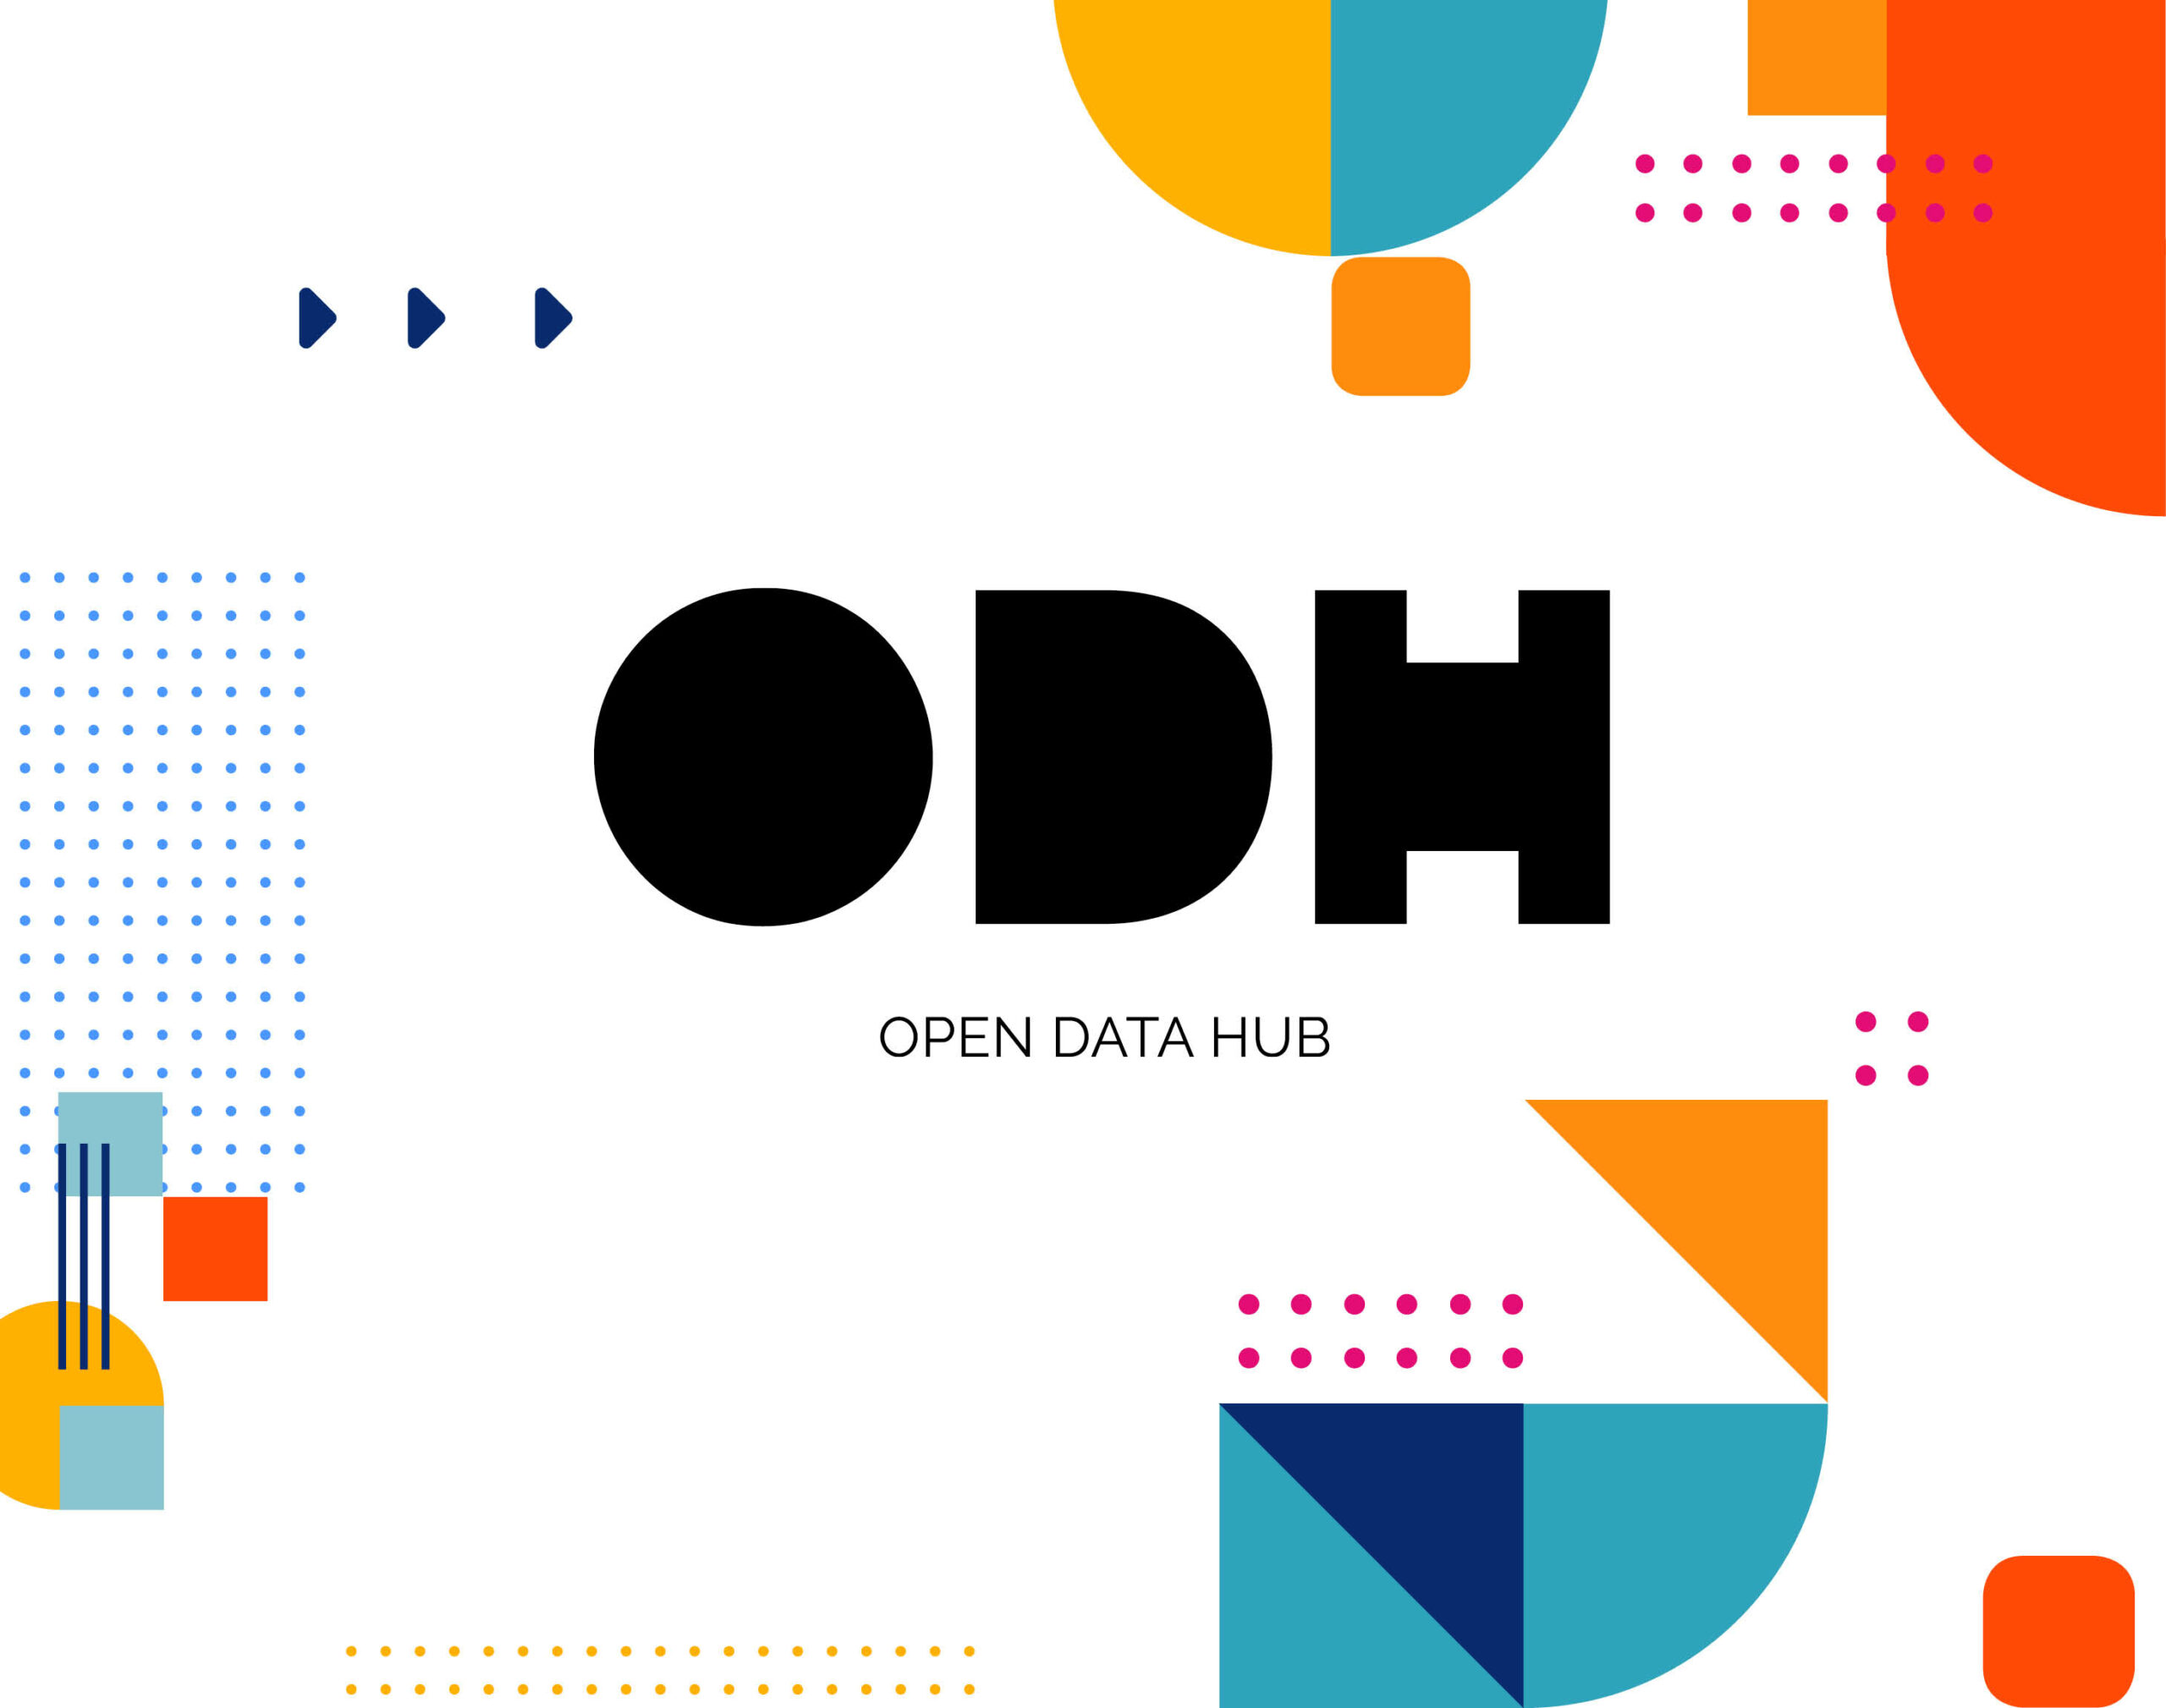 Let’s create Open Data Week together!